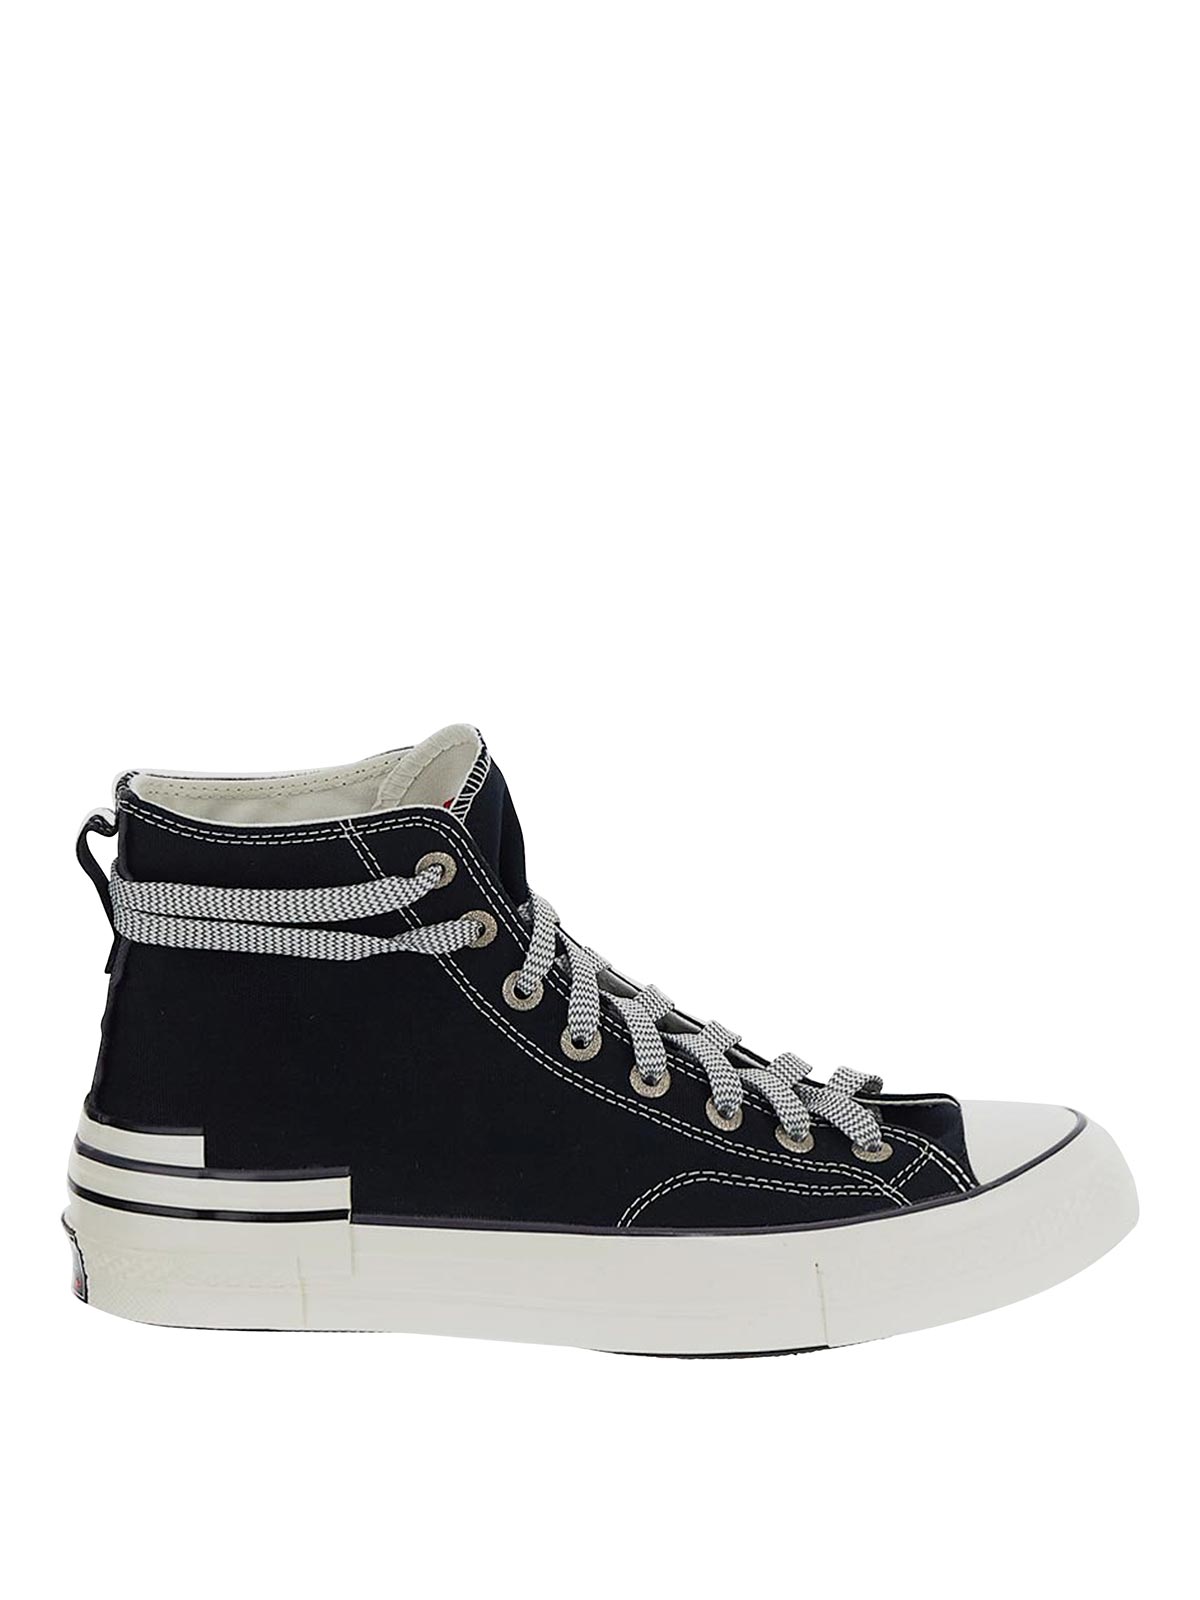 Converse High-top Trainers In Black With Hacked